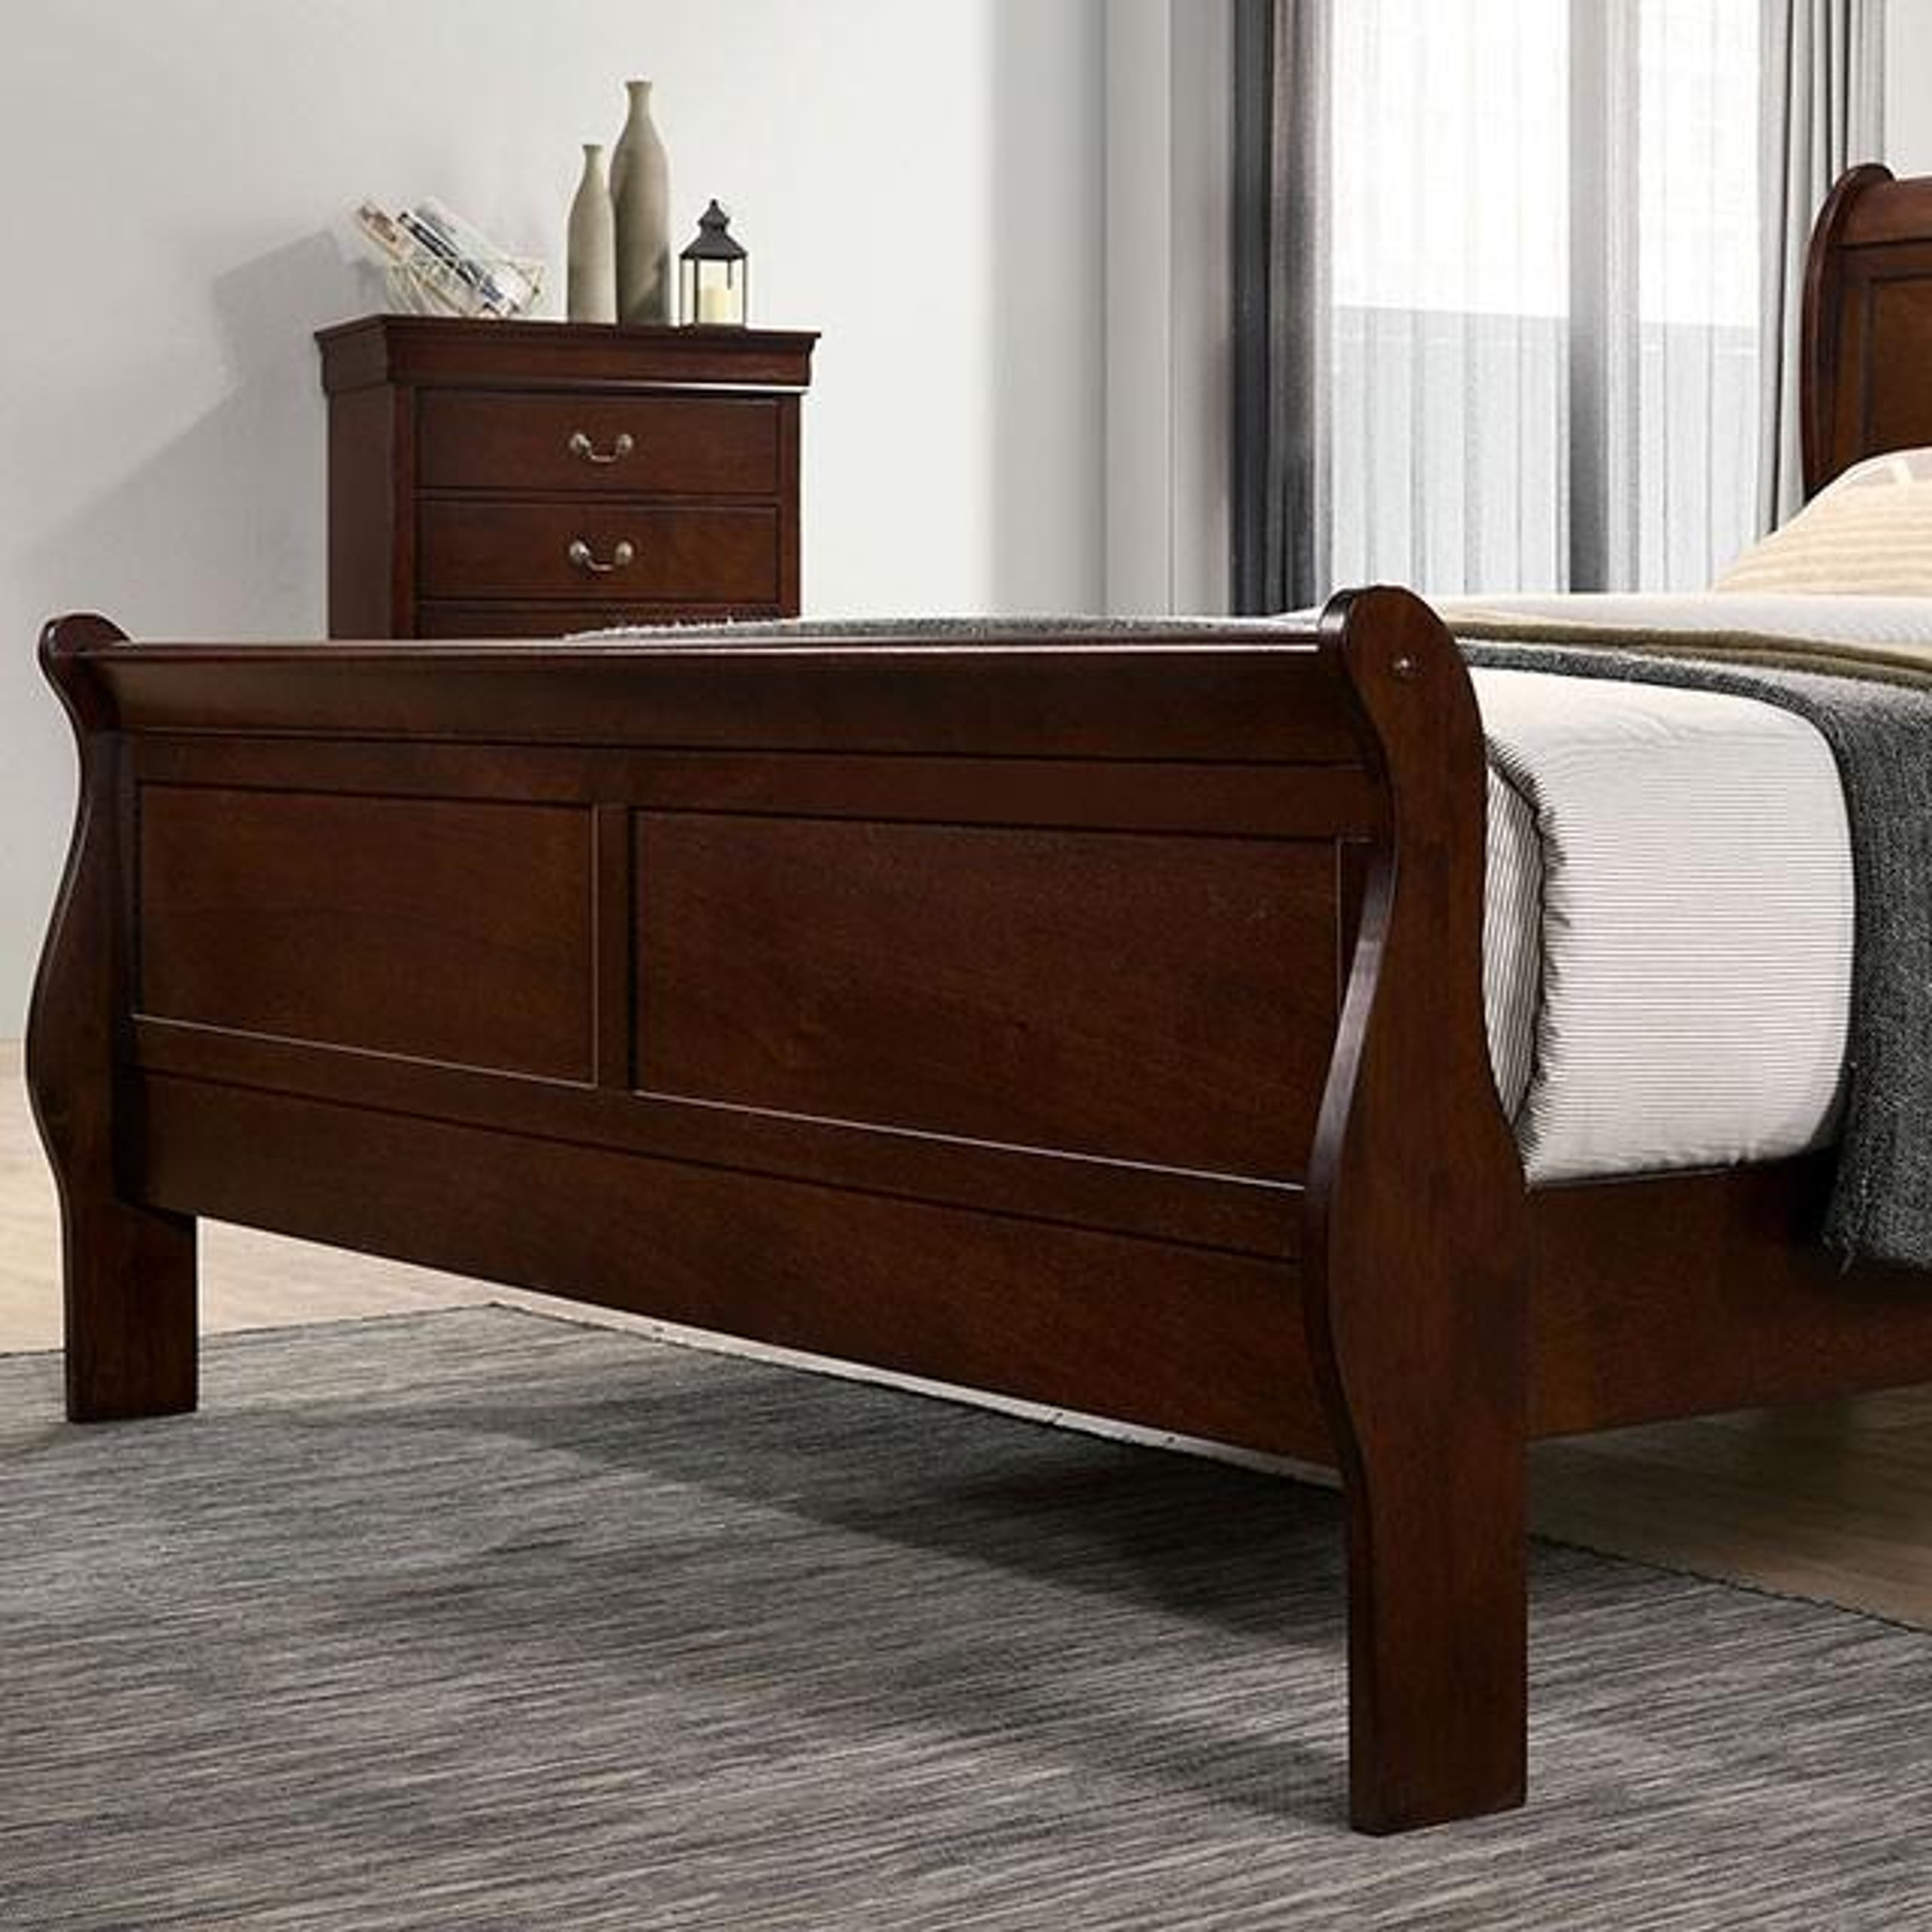 Furniture of America Louis Philippe III 5pc Sleigh Bedroom Set in Cherry